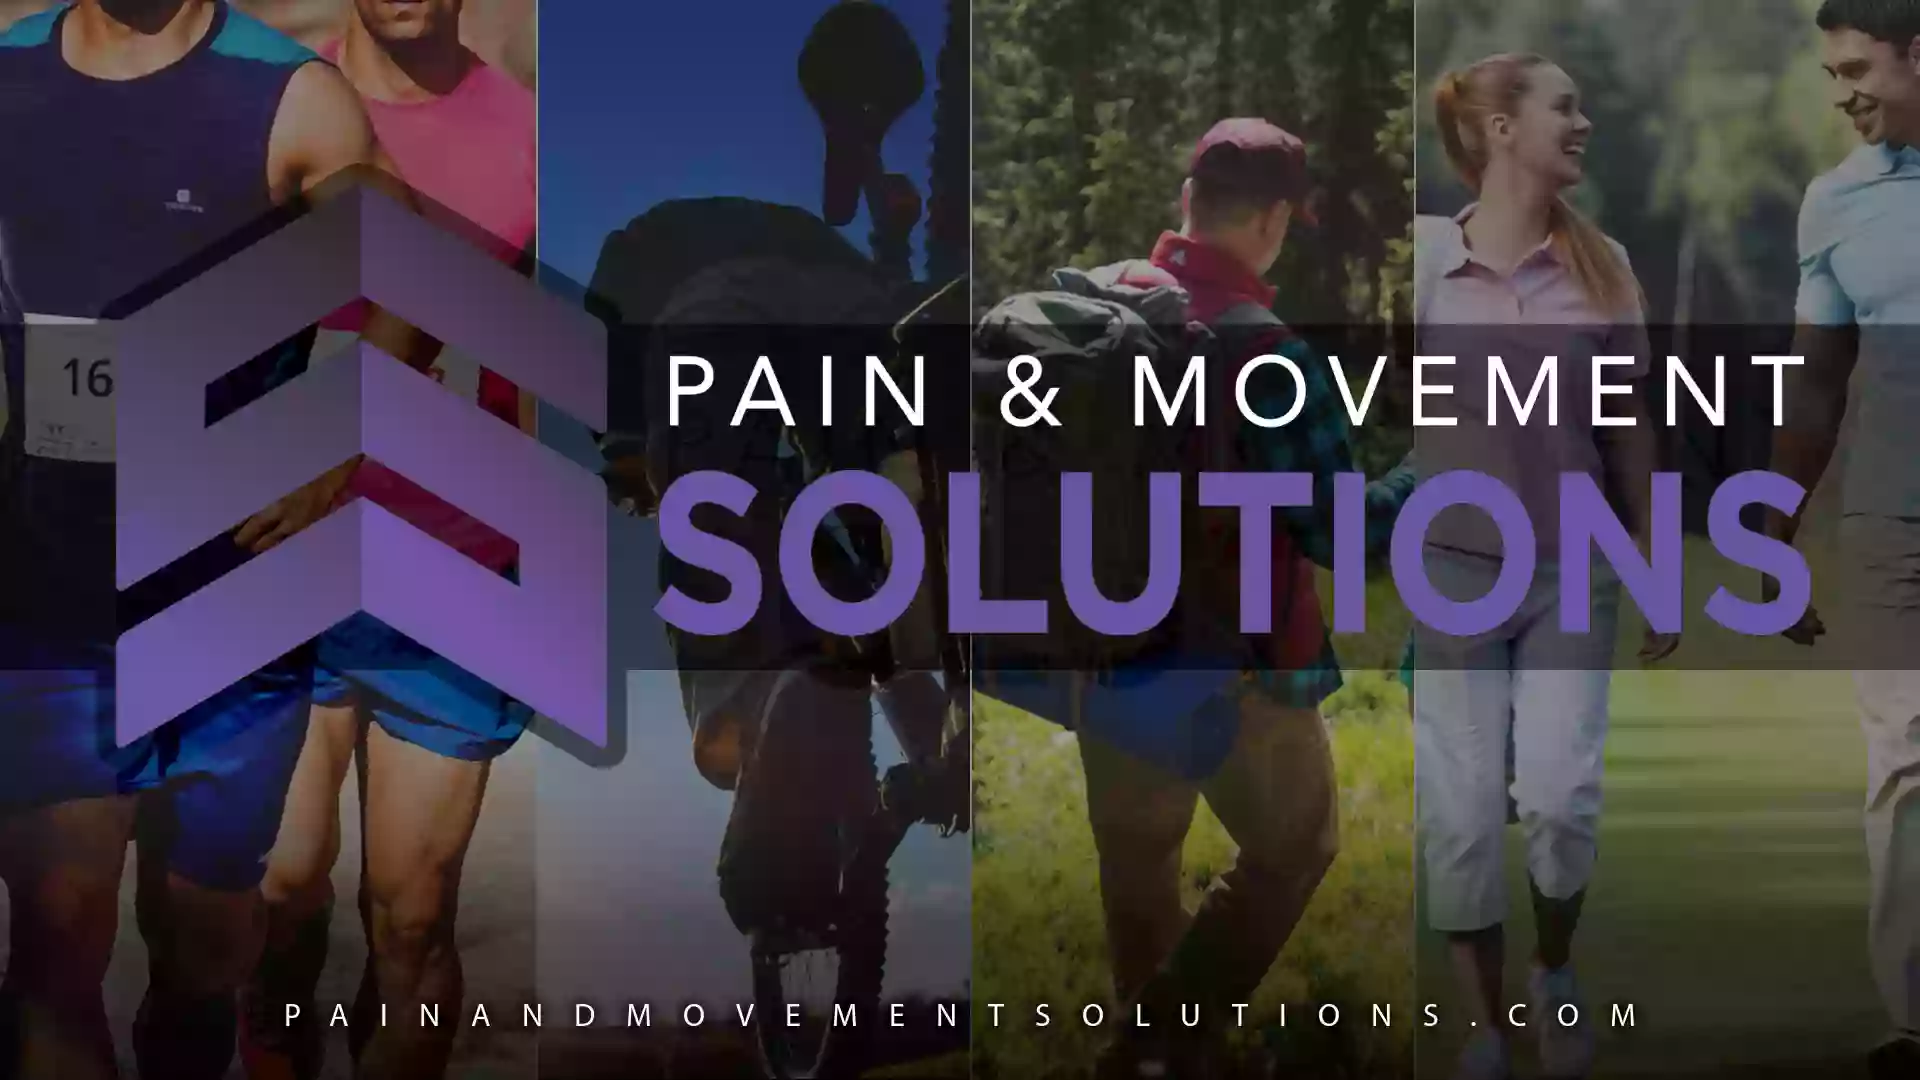 Pain & Movement Solutions